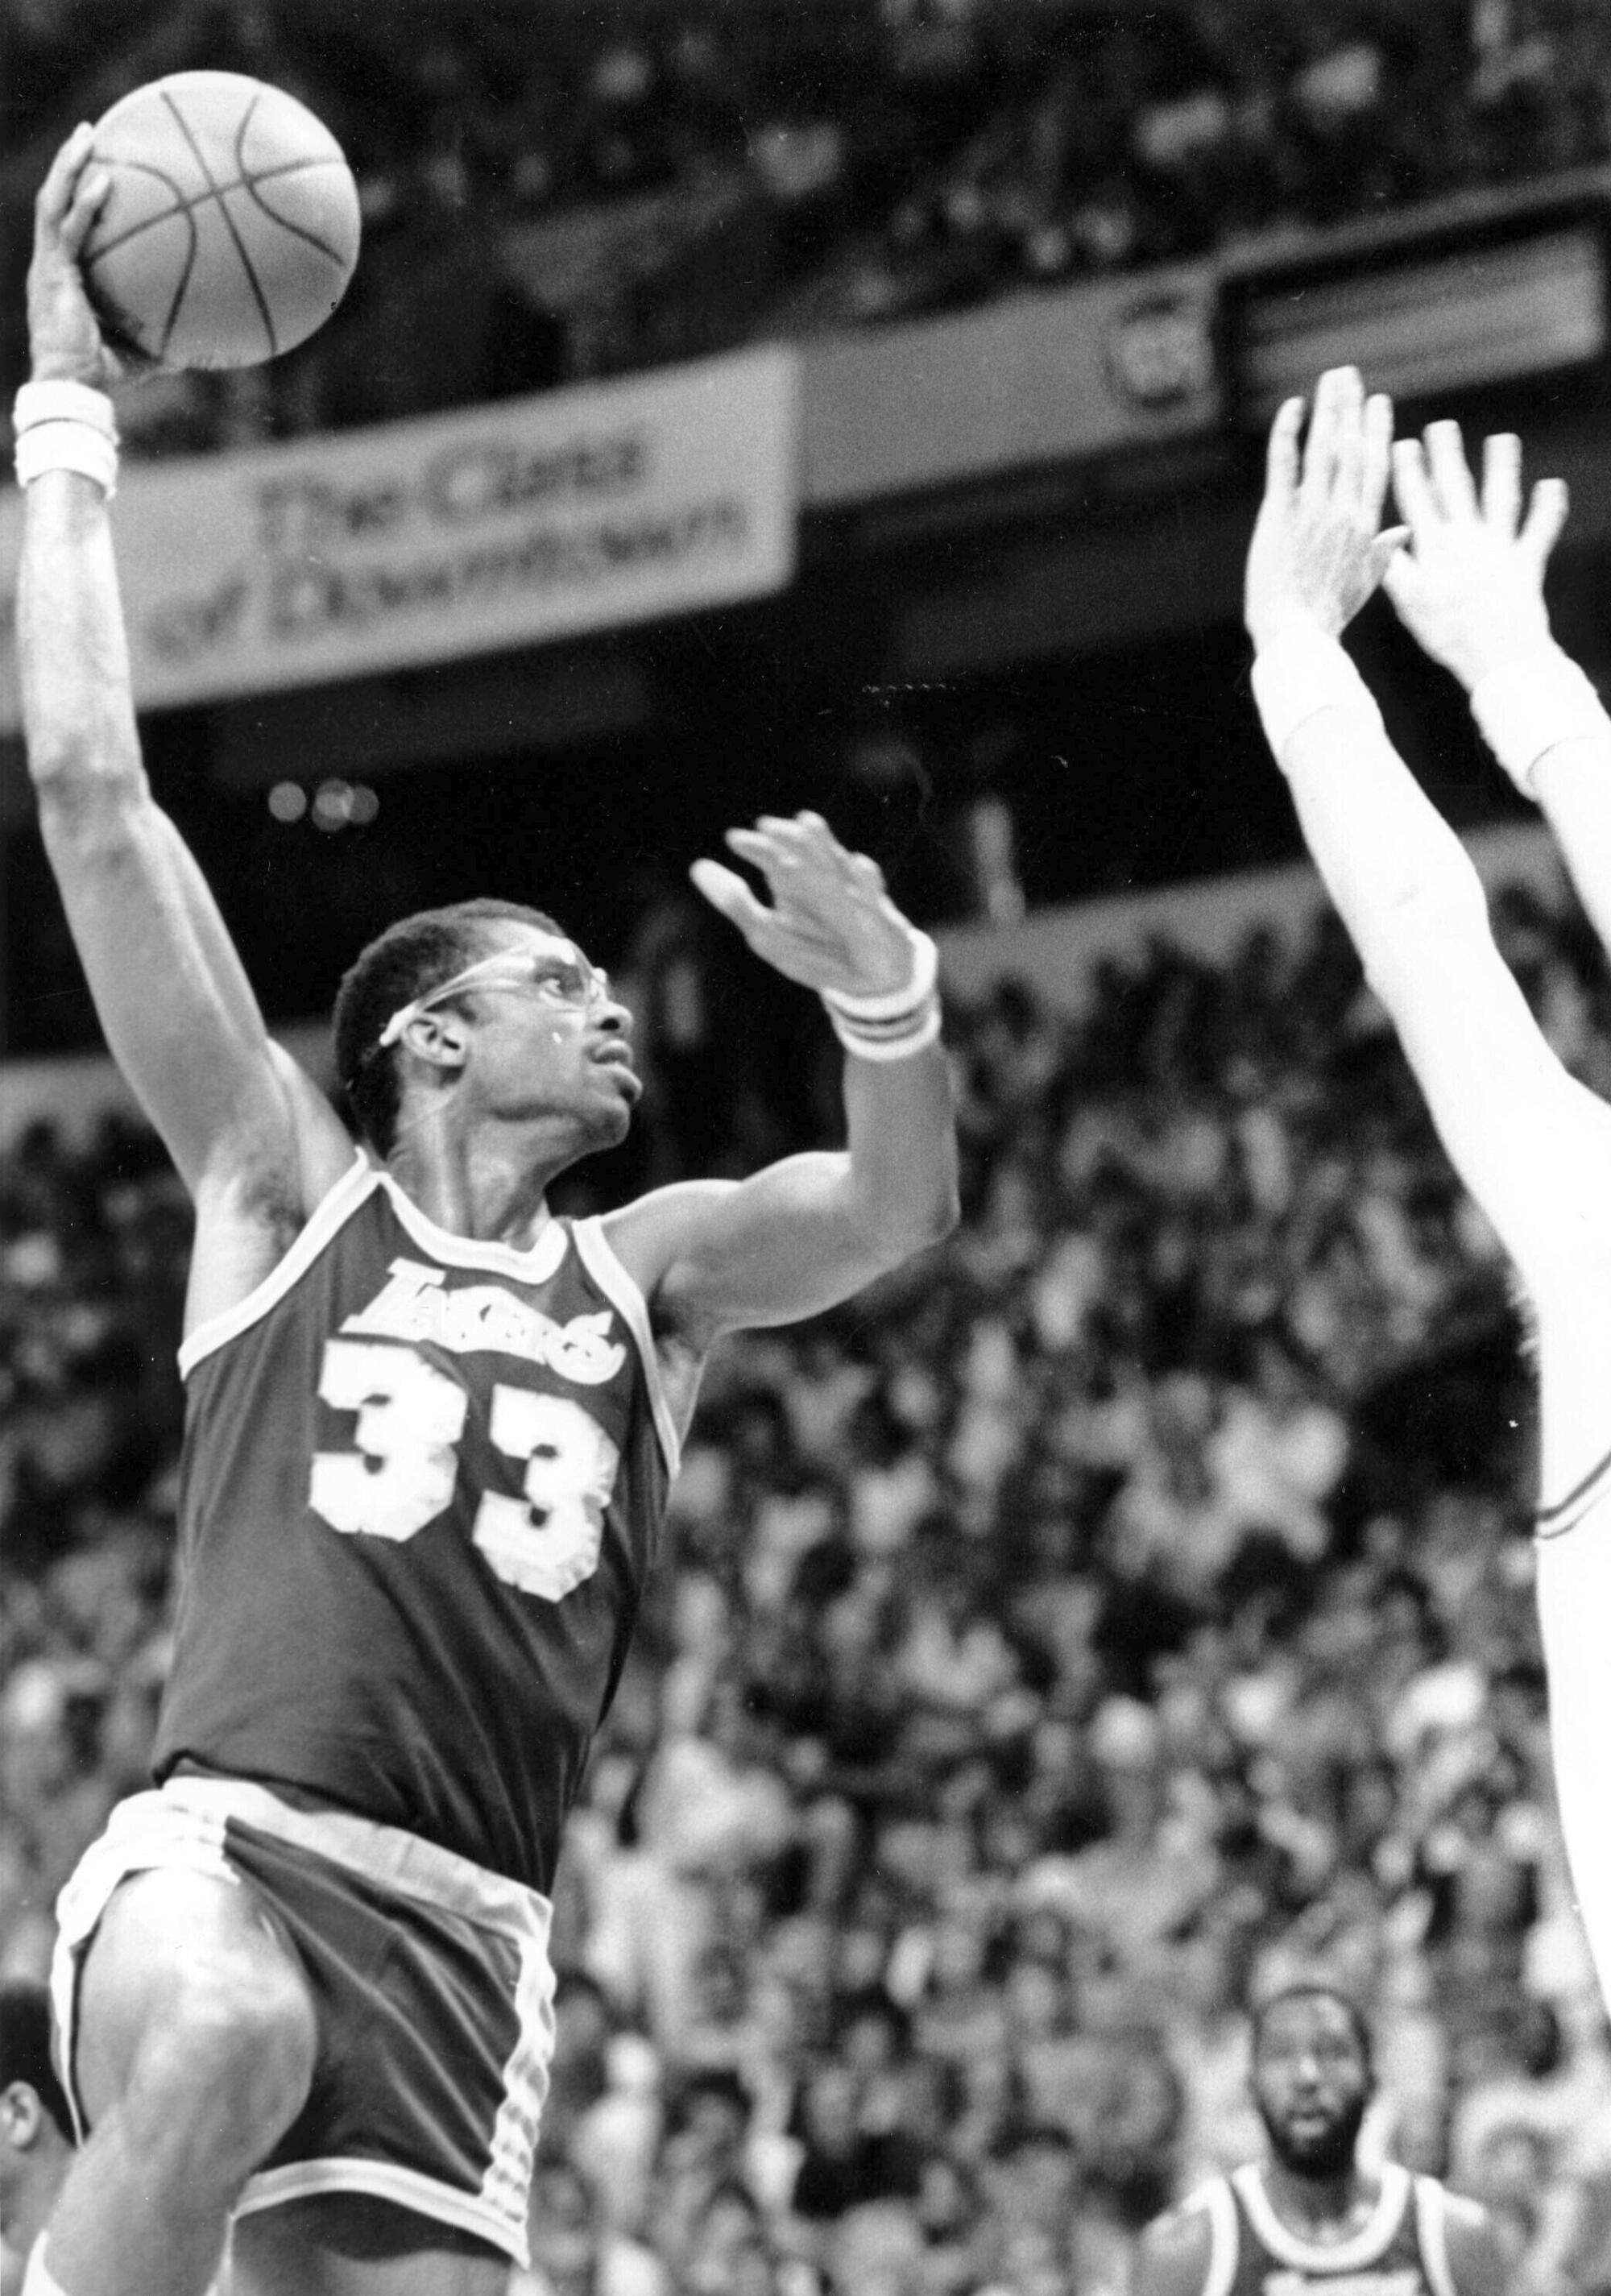 Lakers' Kareem Abdul-Jabbar shoots a sky hook in a basketball game against the Jazz